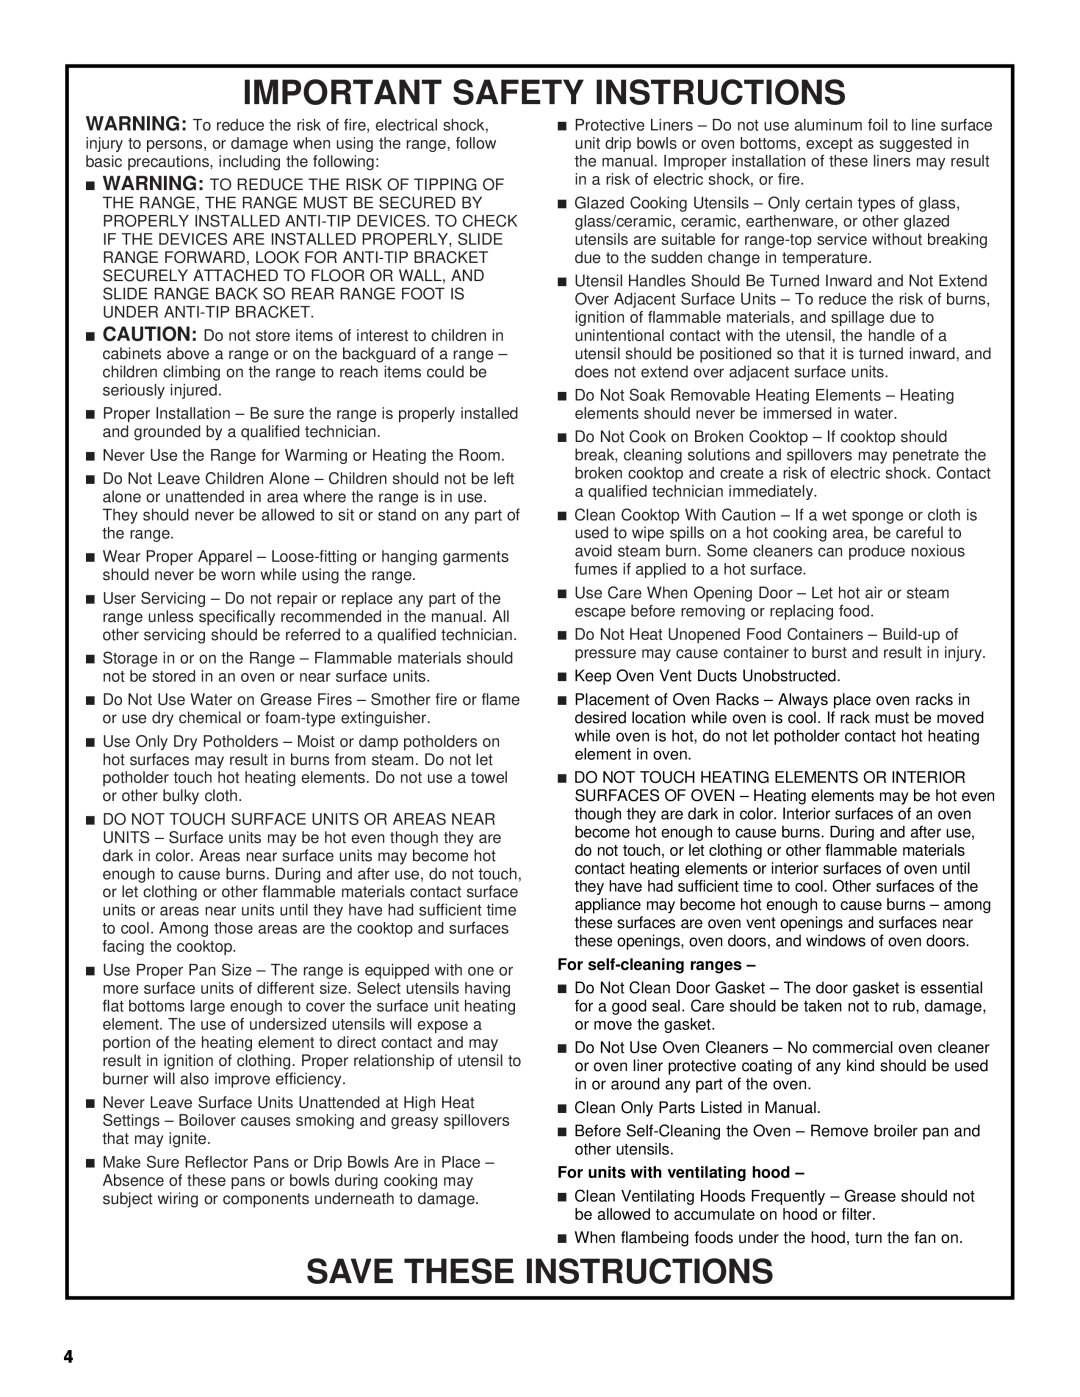 Whirlpool GGE388LX, GGE390LX manual Important Safety Instructions, Save These Instructions, For self-cleaning ranges 